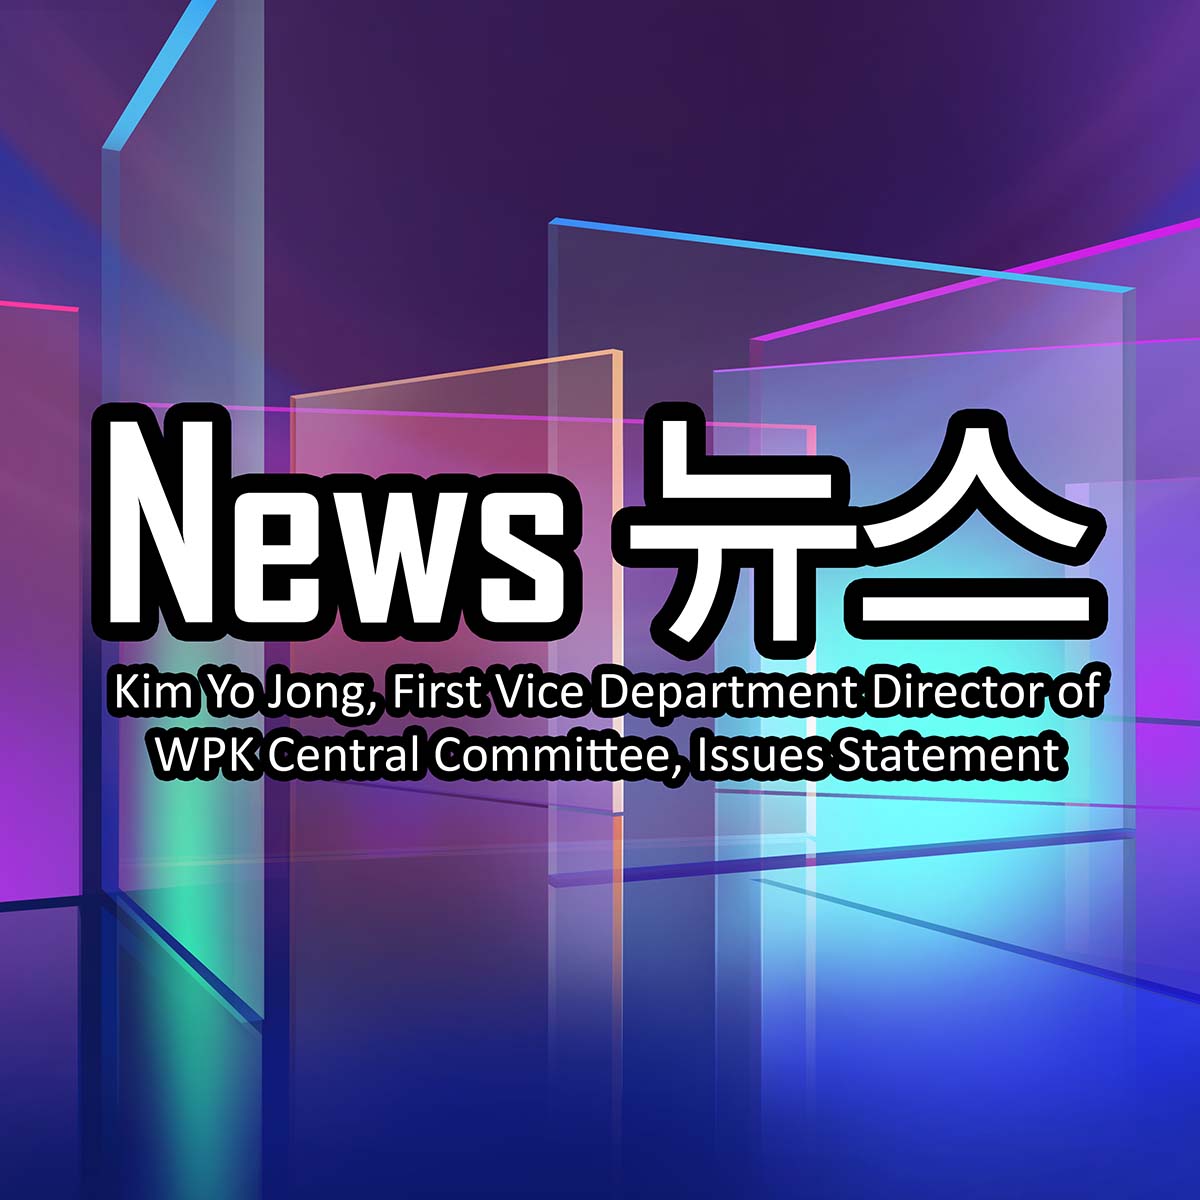 Press Release: Kim Yo Jong, First Vice Department Director of WPK Central Committee, Issues Statement